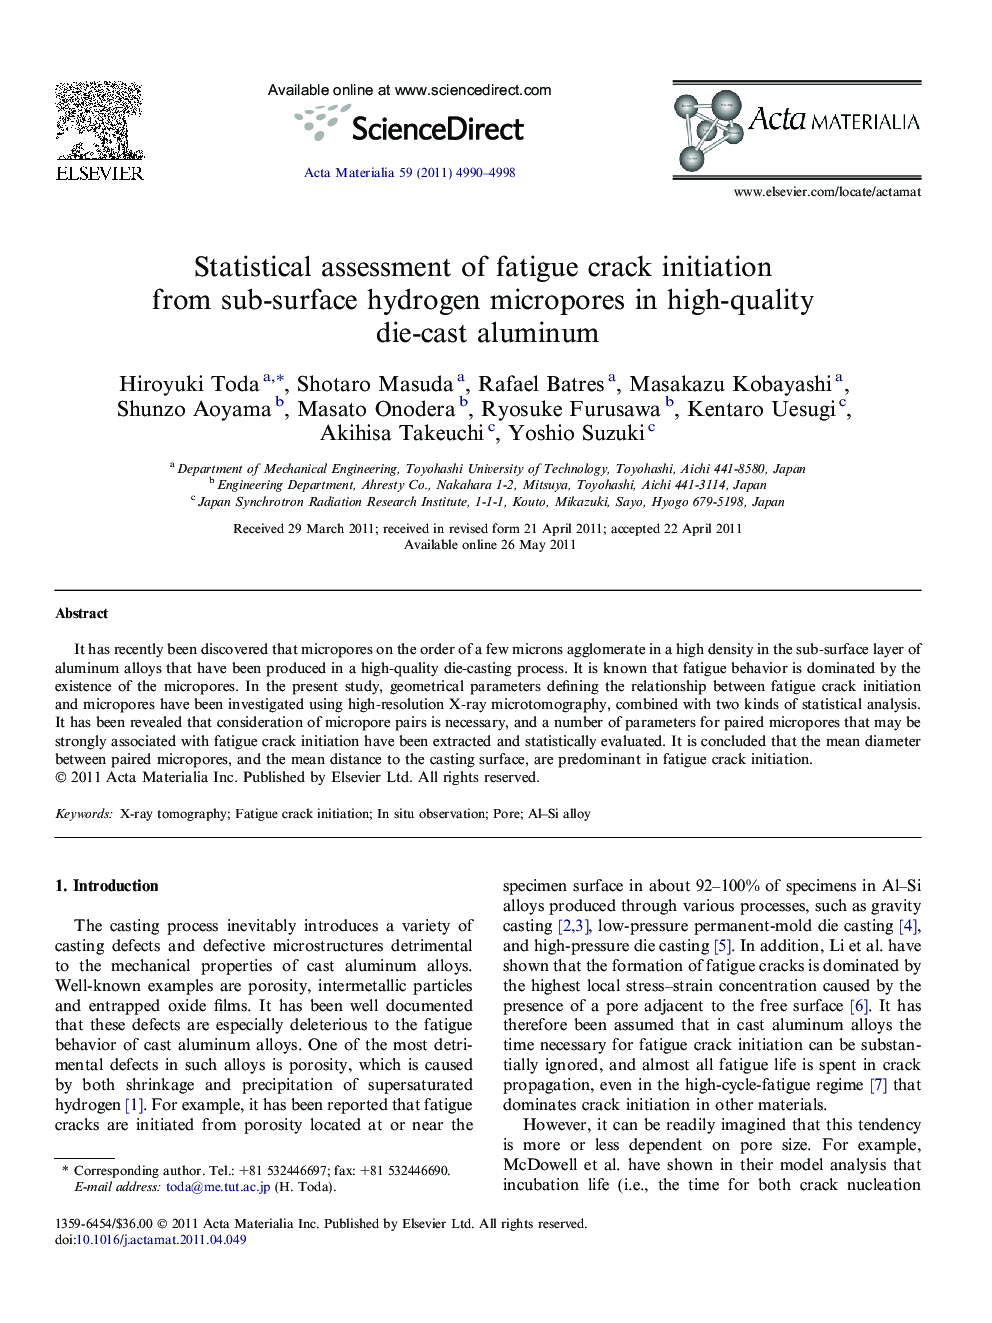 Statistical assessment of fatigue crack initiation from sub-surface hydrogen micropores in high-quality die-cast aluminum